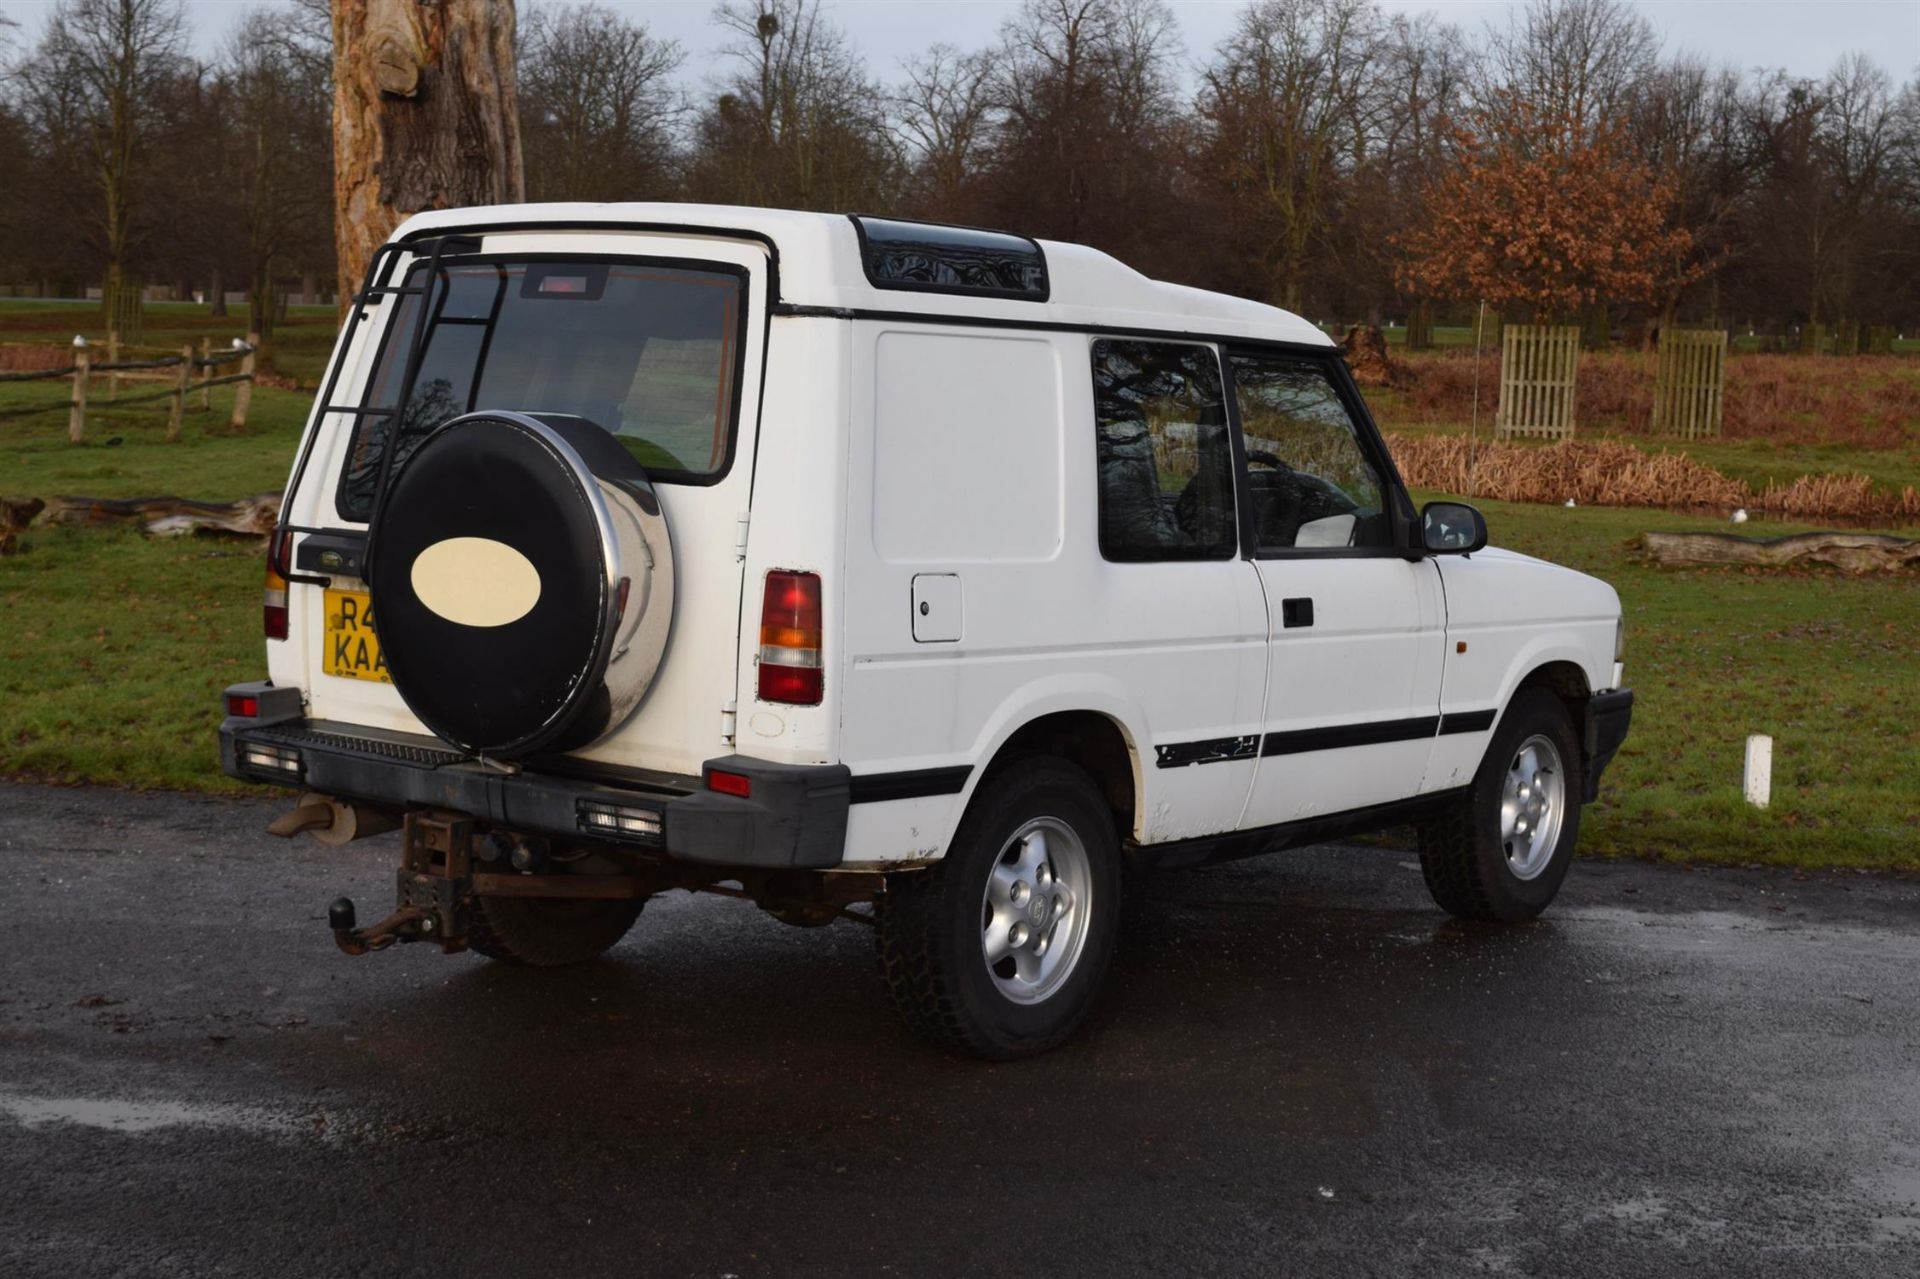 1998 Land Rover Discovery 2-Door R41 KAA. 2-door Land Rover Discovery 300 TDI, which was first - Image 30 of 41